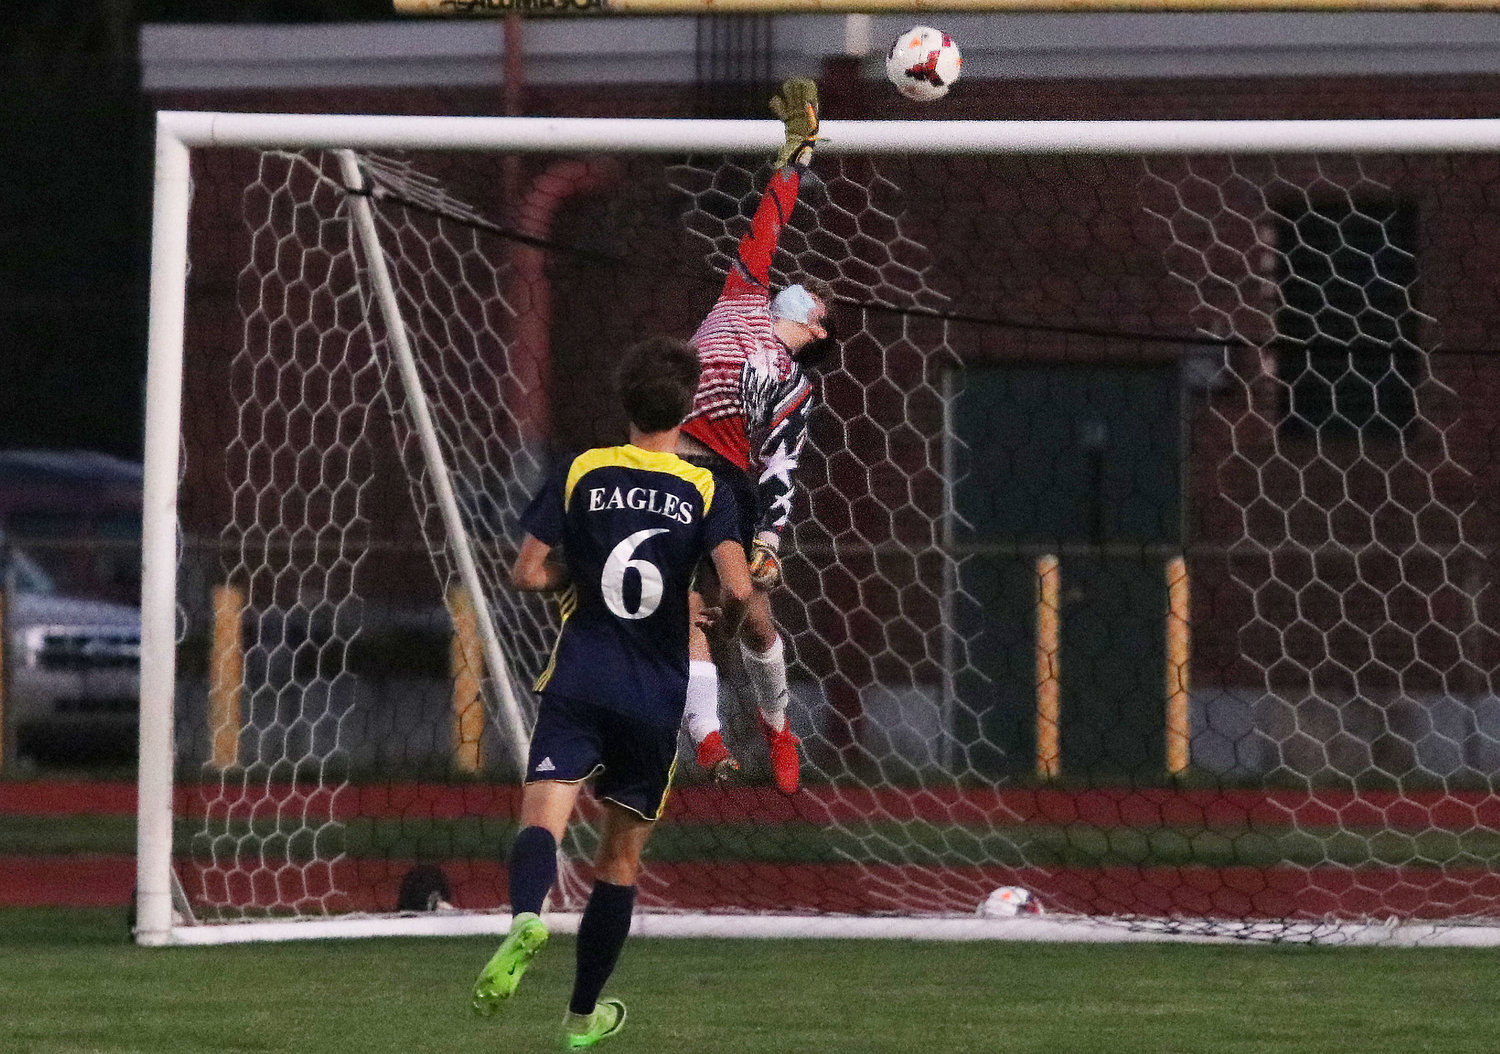 Barrington's Graham Vatter watches while a shot sails over the Tiverton goal.